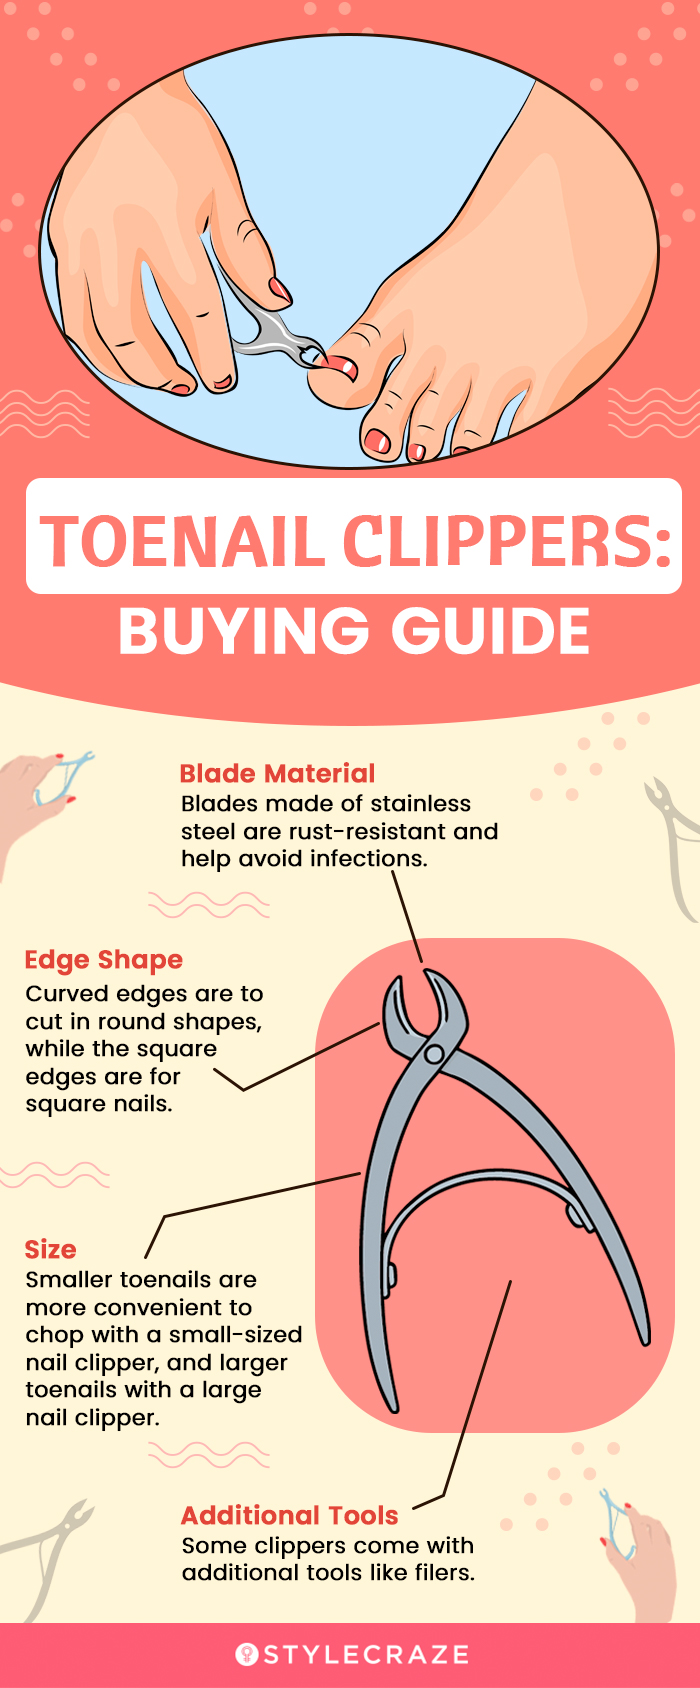 Toenail Clippers: Buying Guide [infographic]